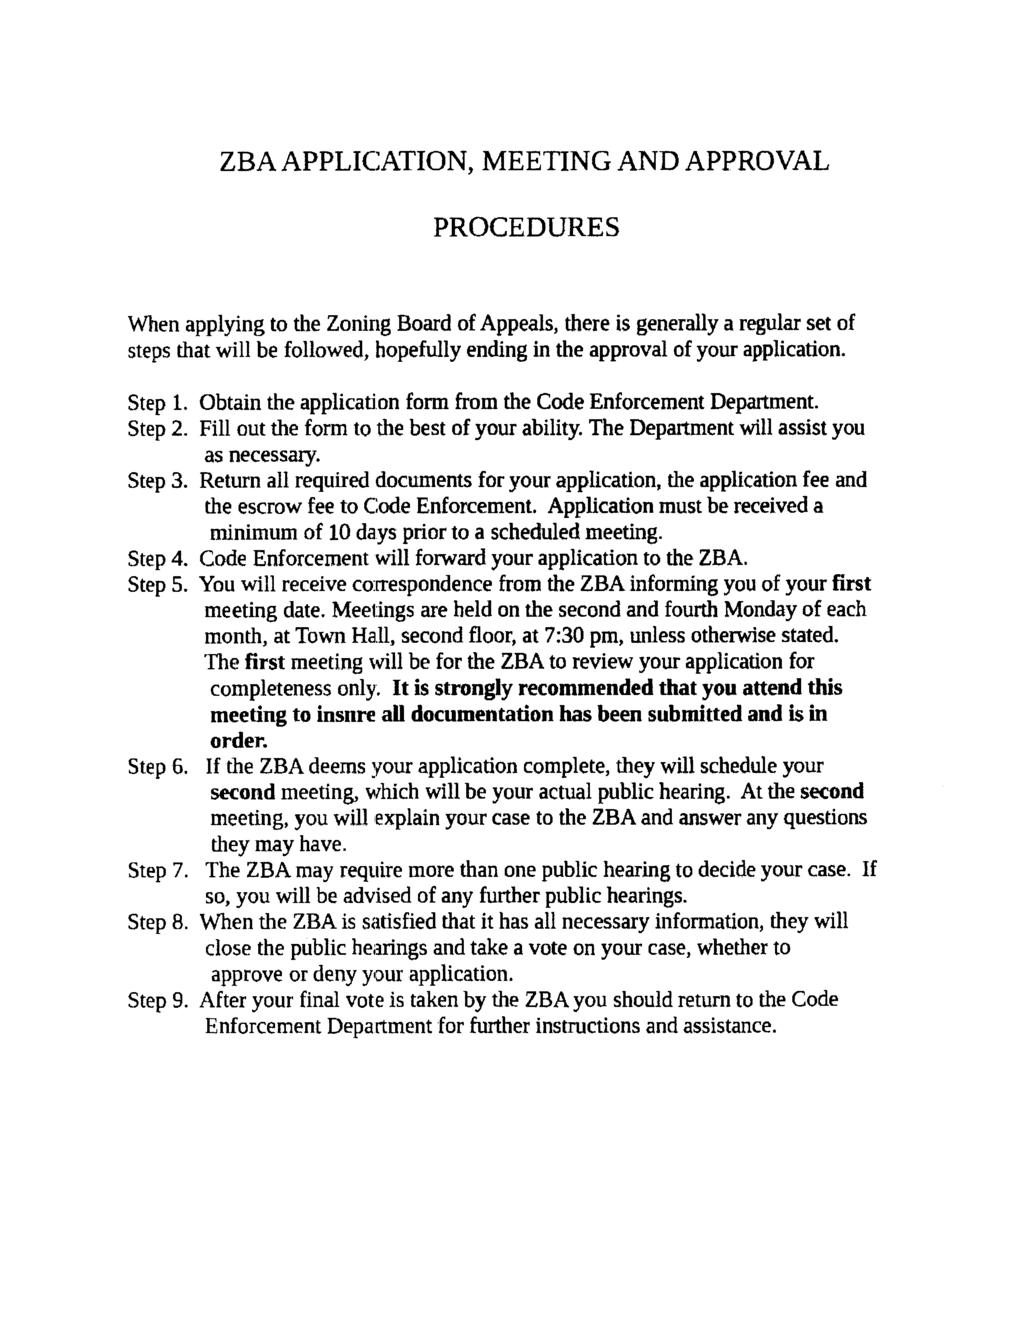 ZBA APPLICATION, MEETING AND APPROVAL PROCEDURES When applying to the Zoning Board of Appeals, there is generally a regular set of steps that will be followed, hopefully ending in the approval of